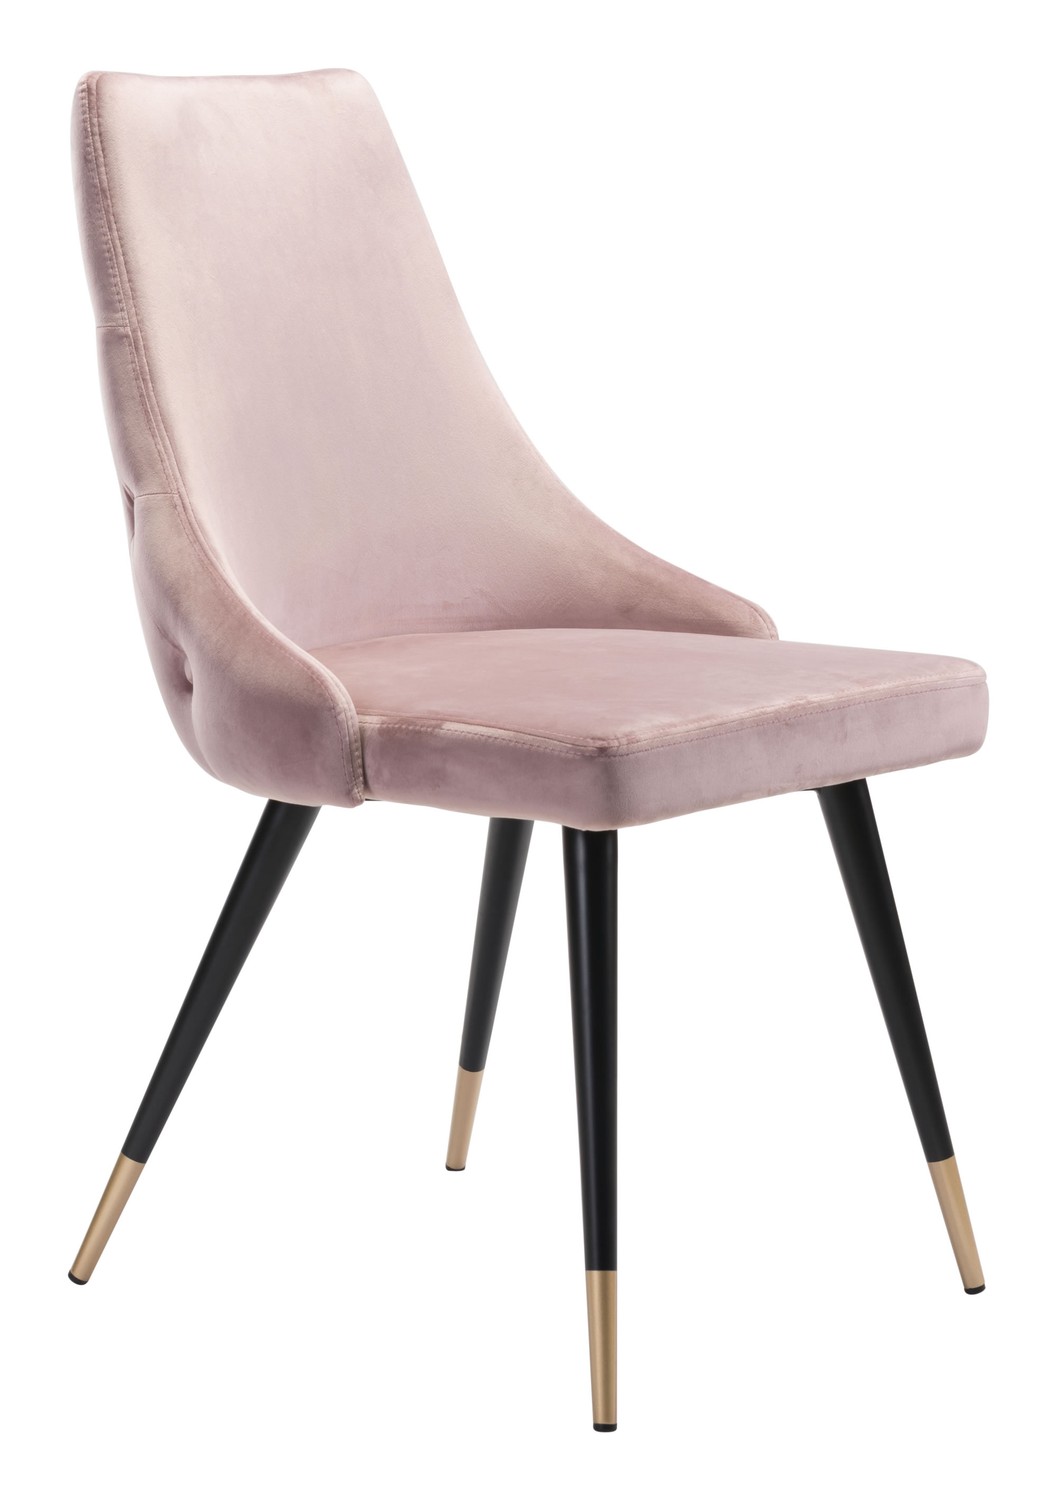 Fashionable Rose Pink Velvet Dining or Side Chairs - Set of 2